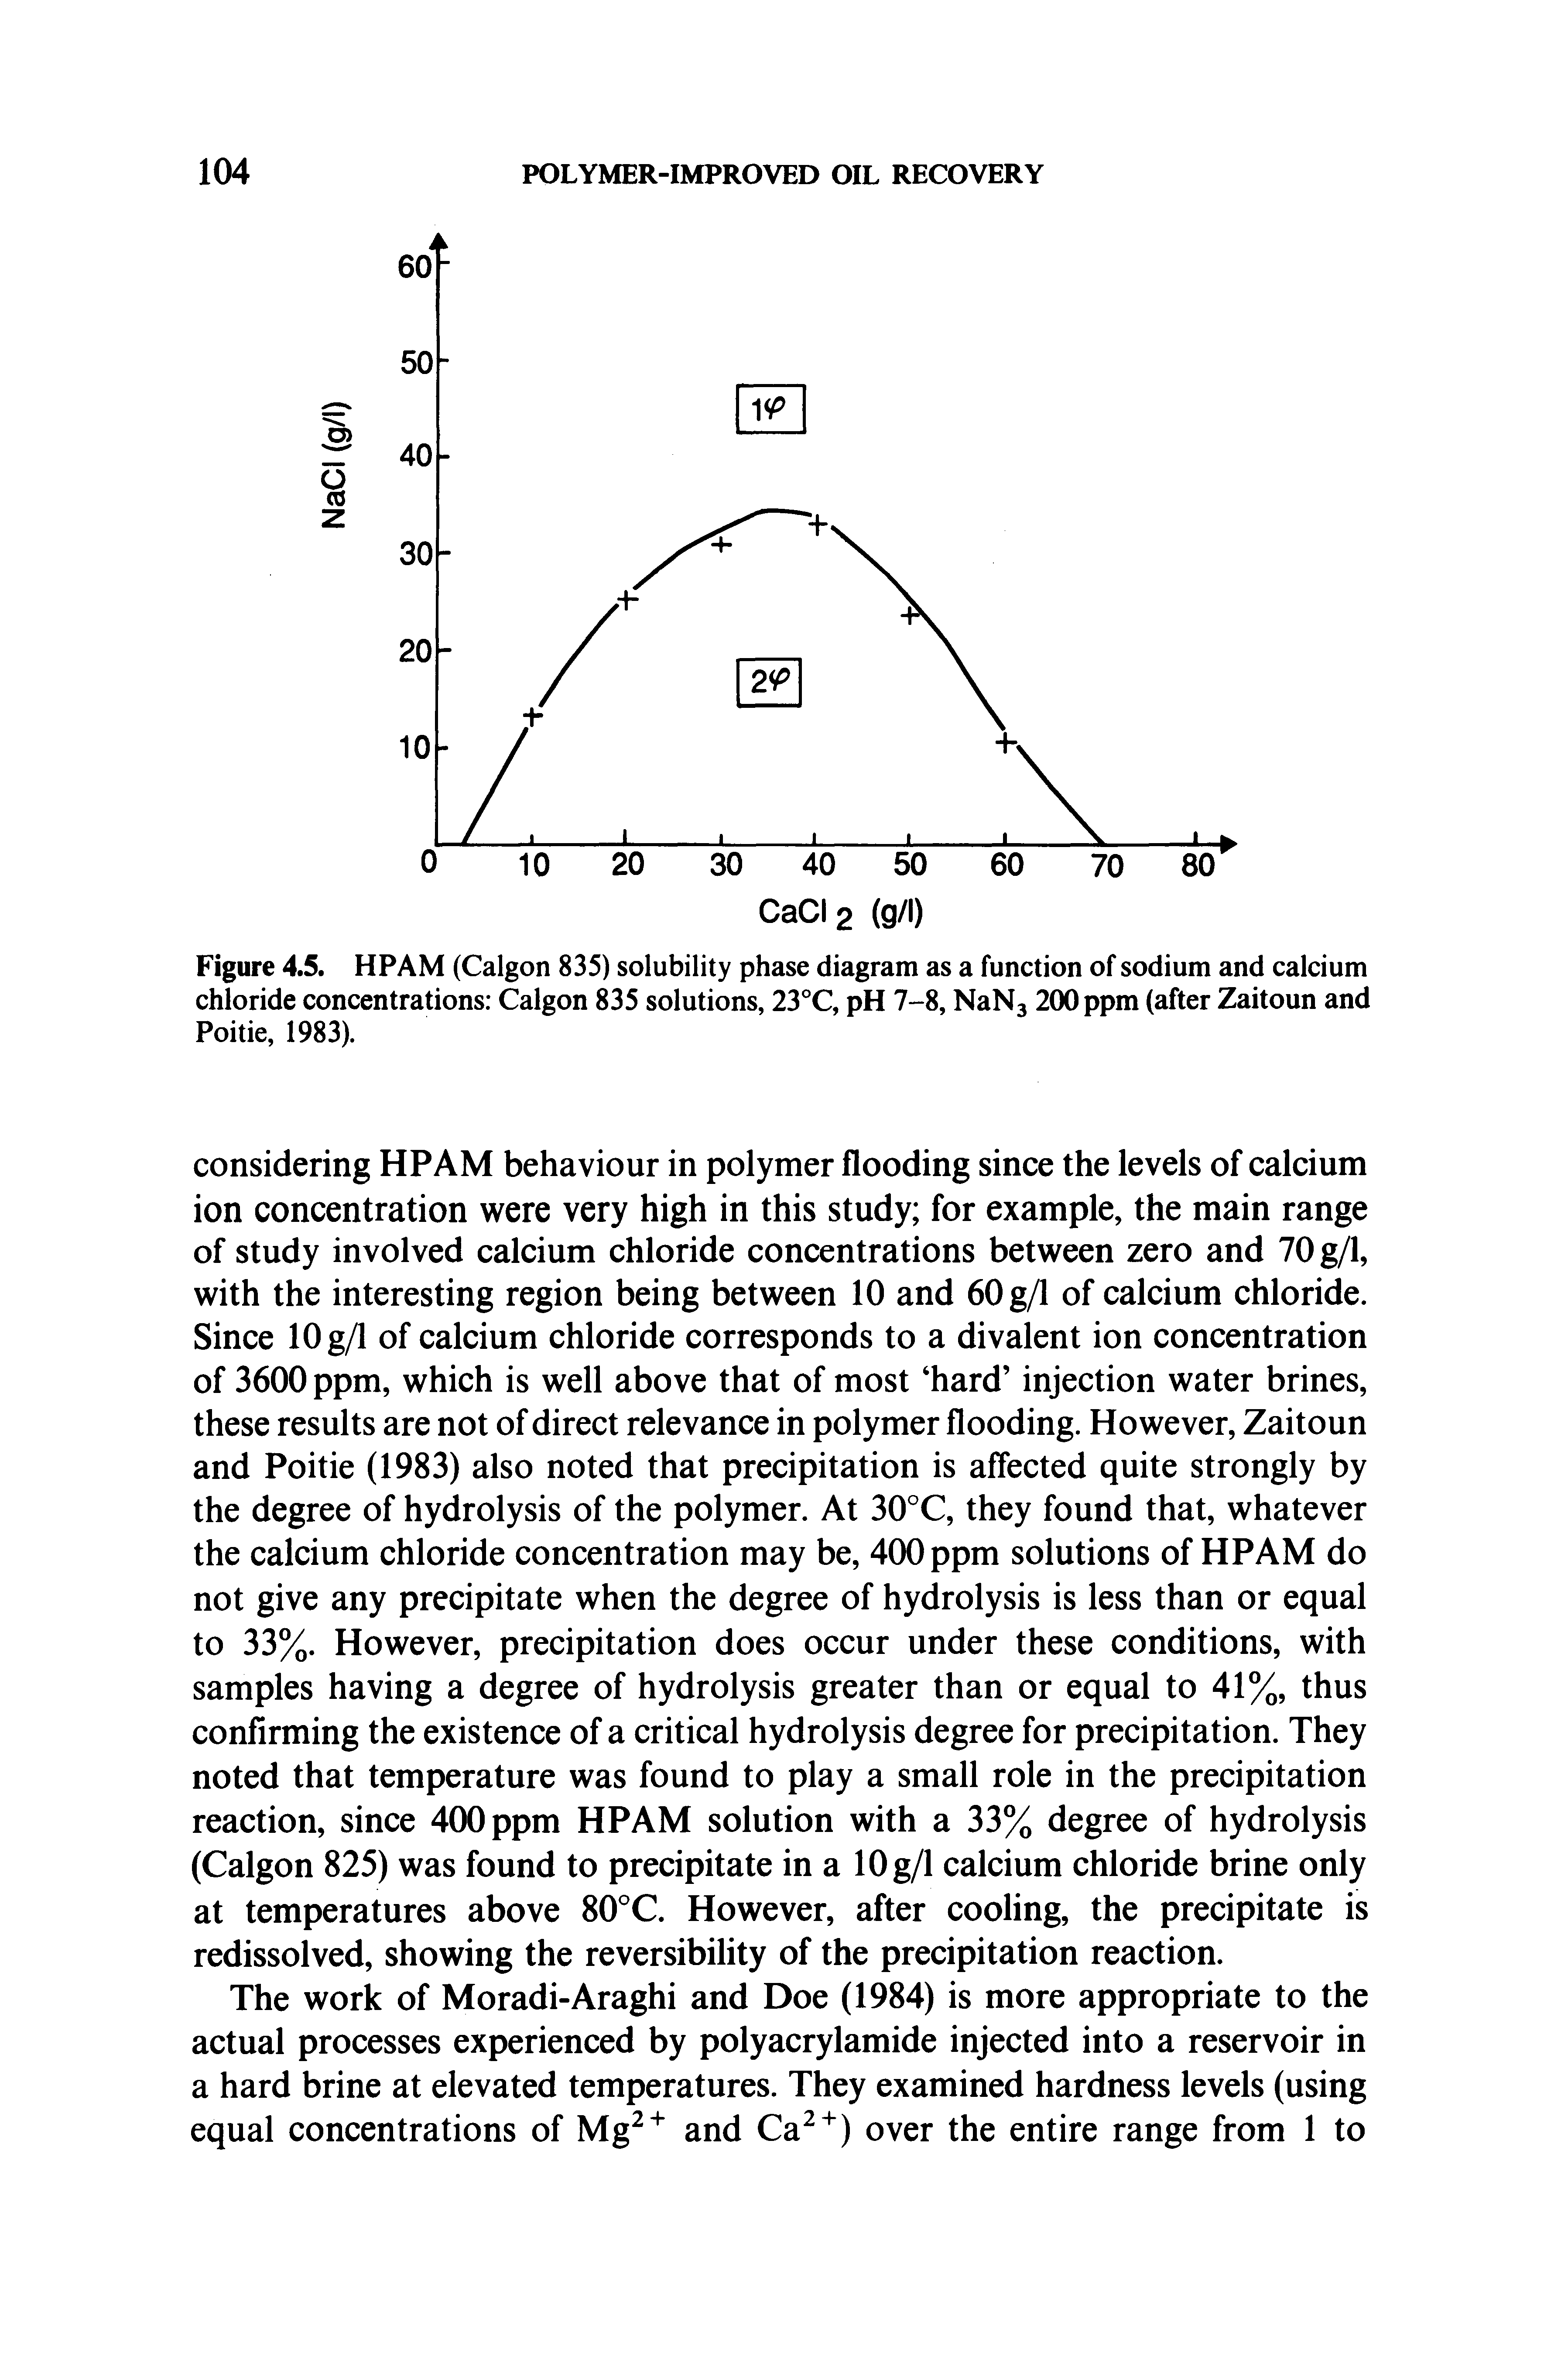 Figure 4.5. HPAM (Calgon 835) solubility phase diagram as a function of sodium and calcium chloride concentrations Calgon 835 solutions, 23°C, pH 7-8, NaNj 200 ppm (after Zaitoun and Poitie, 1983).